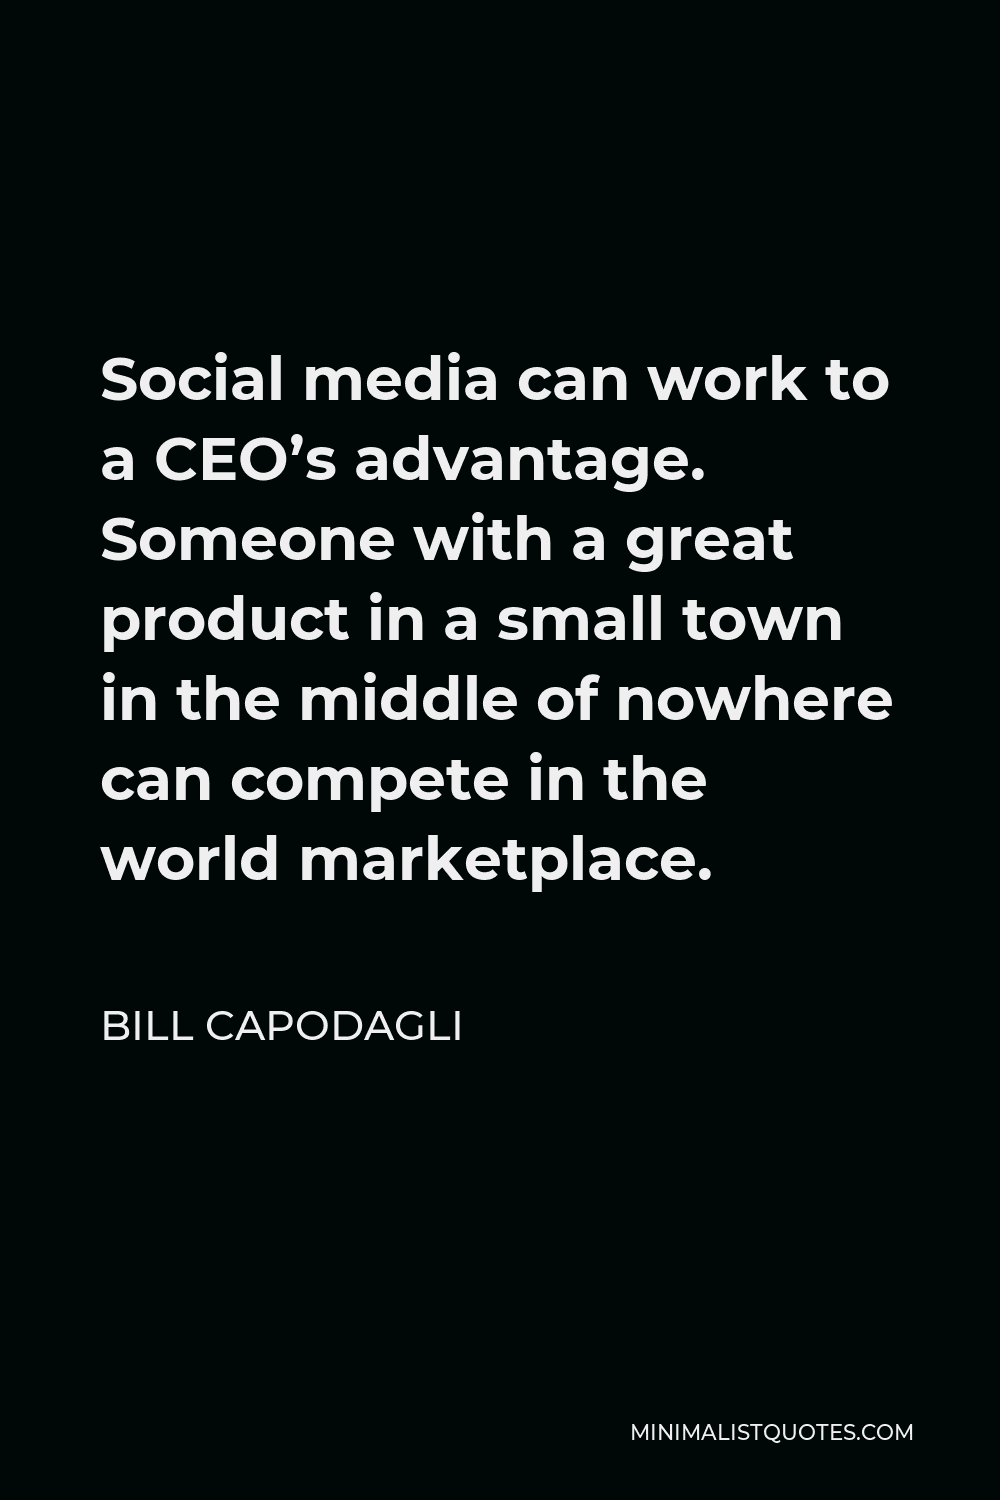 Bill Capodagli Quote - Social media can work to a CEO’s advantage. Someone with a great product in a small town in the middle of nowhere can compete in the world marketplace.